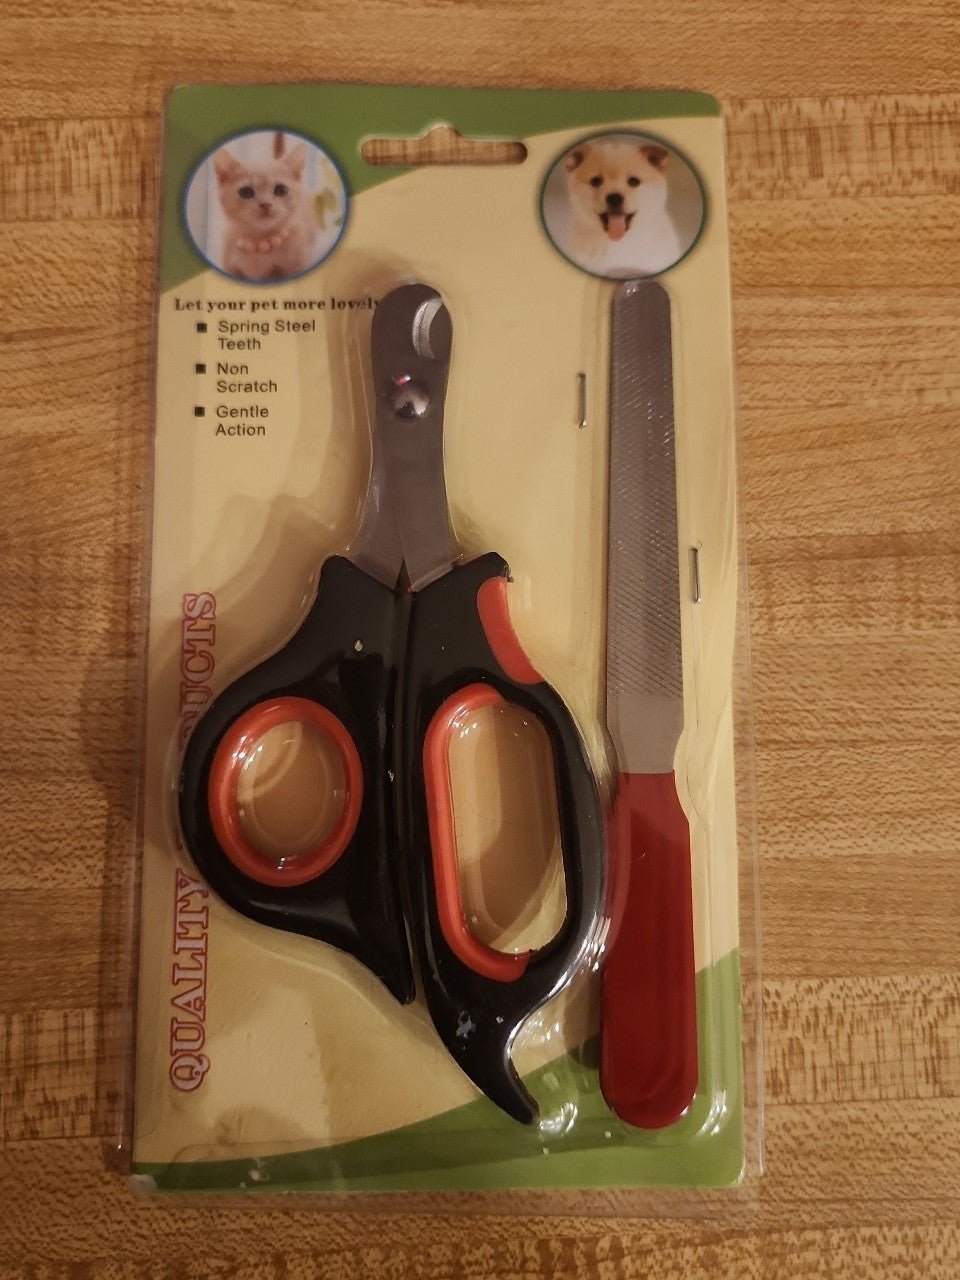 Pet Grooming Tools Quality Products f8G7Wdc5m